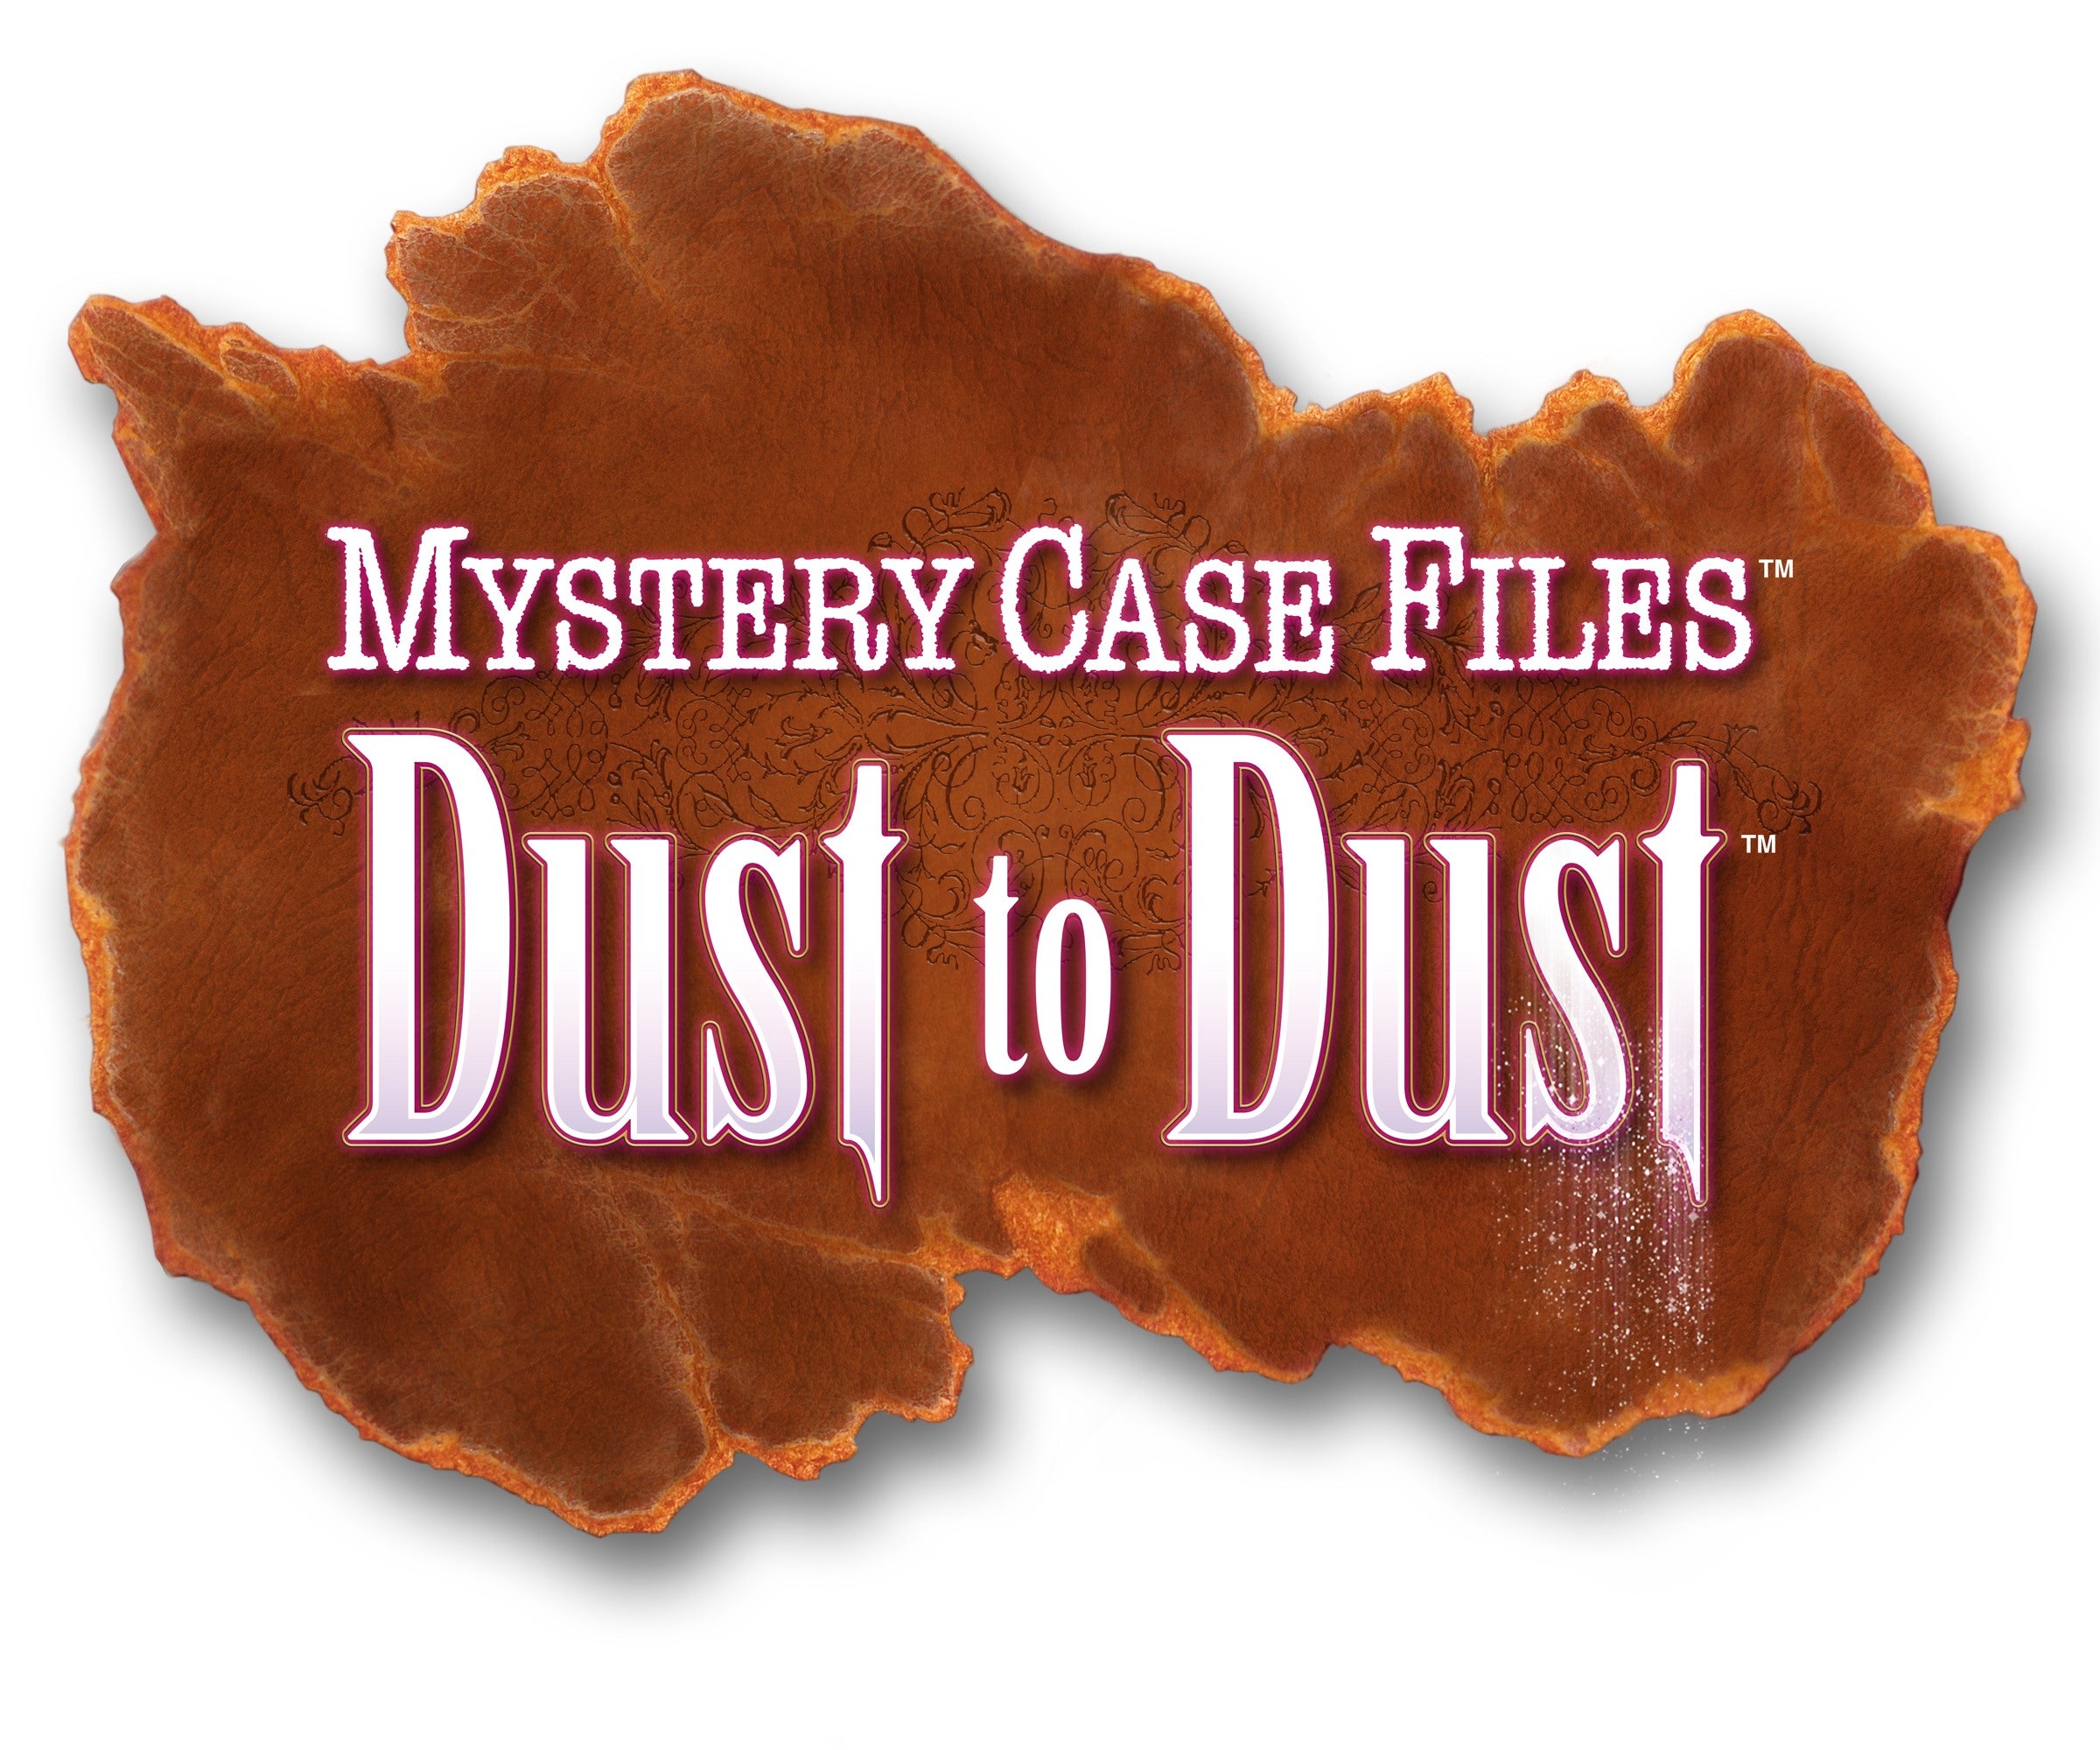 Mystery case files game series order